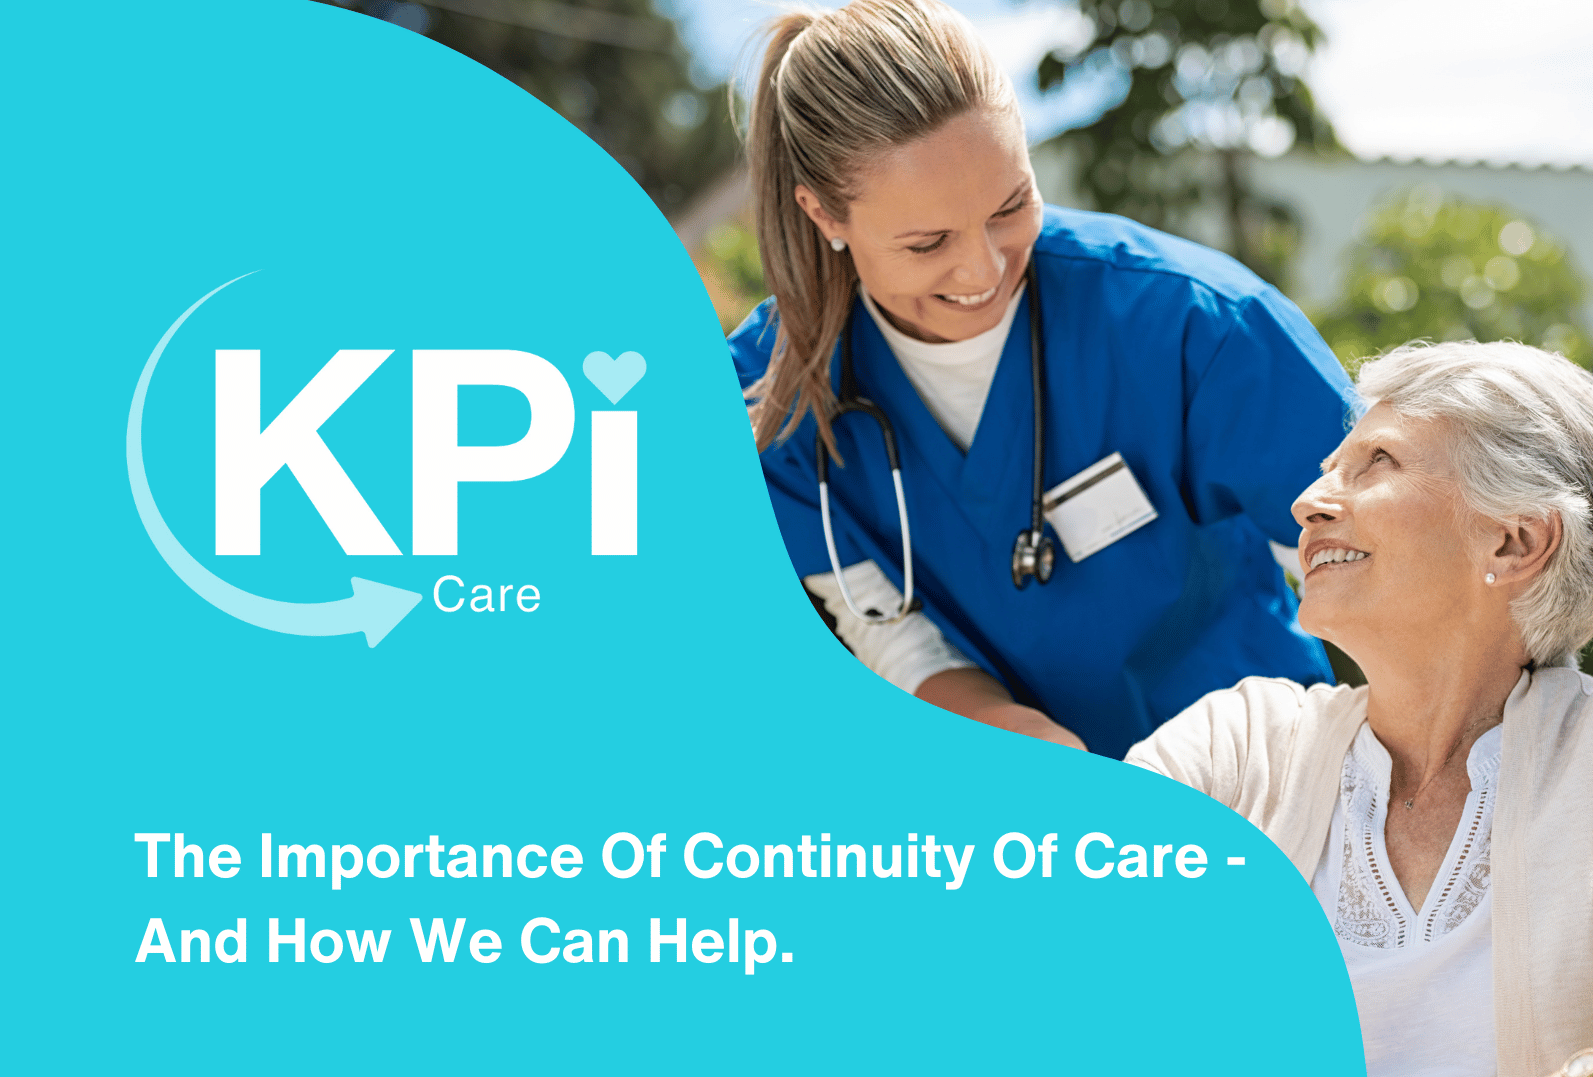 The Importance of Continuity of Care - and How KPI Can Help.